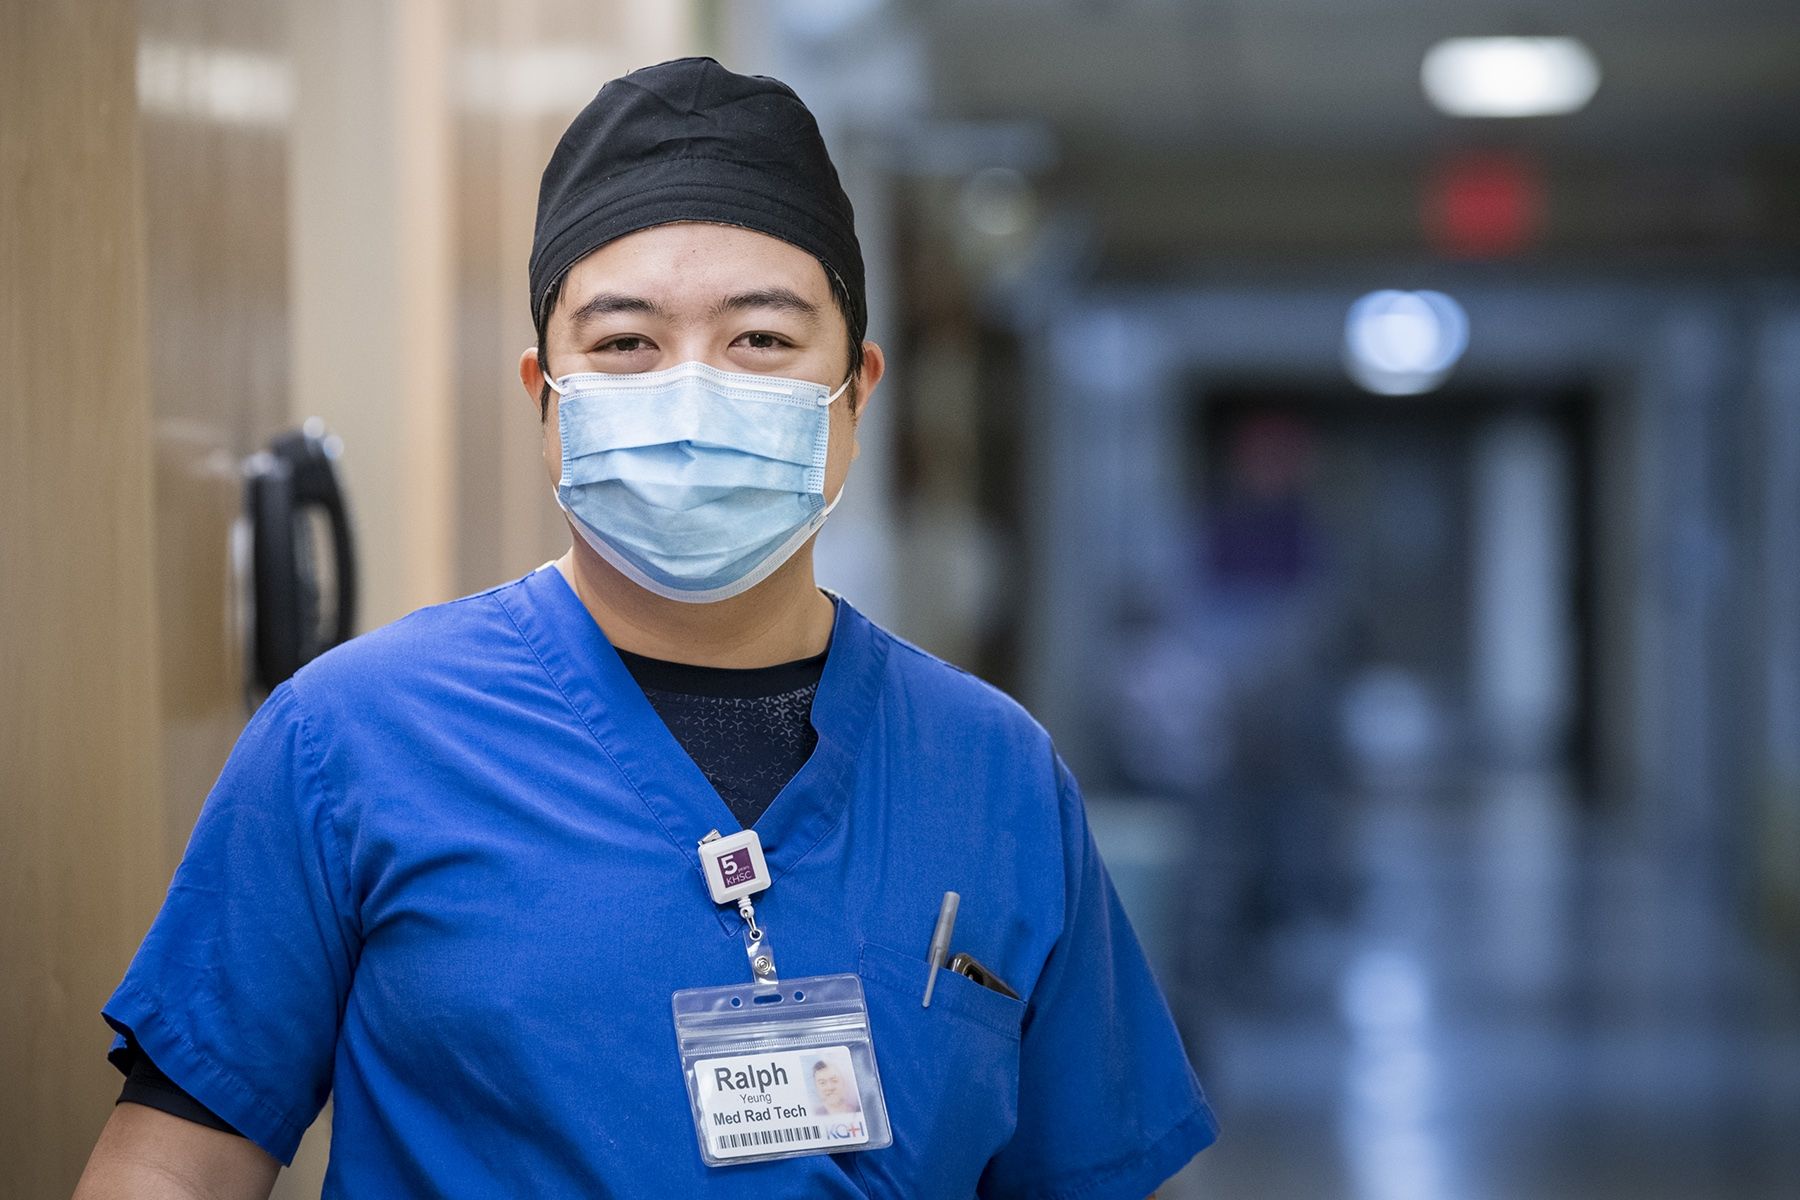 Ralph Yeung is pictured in a hallway at the KGH site. He's wearing blue scrubs, a mask and black scrub hat.